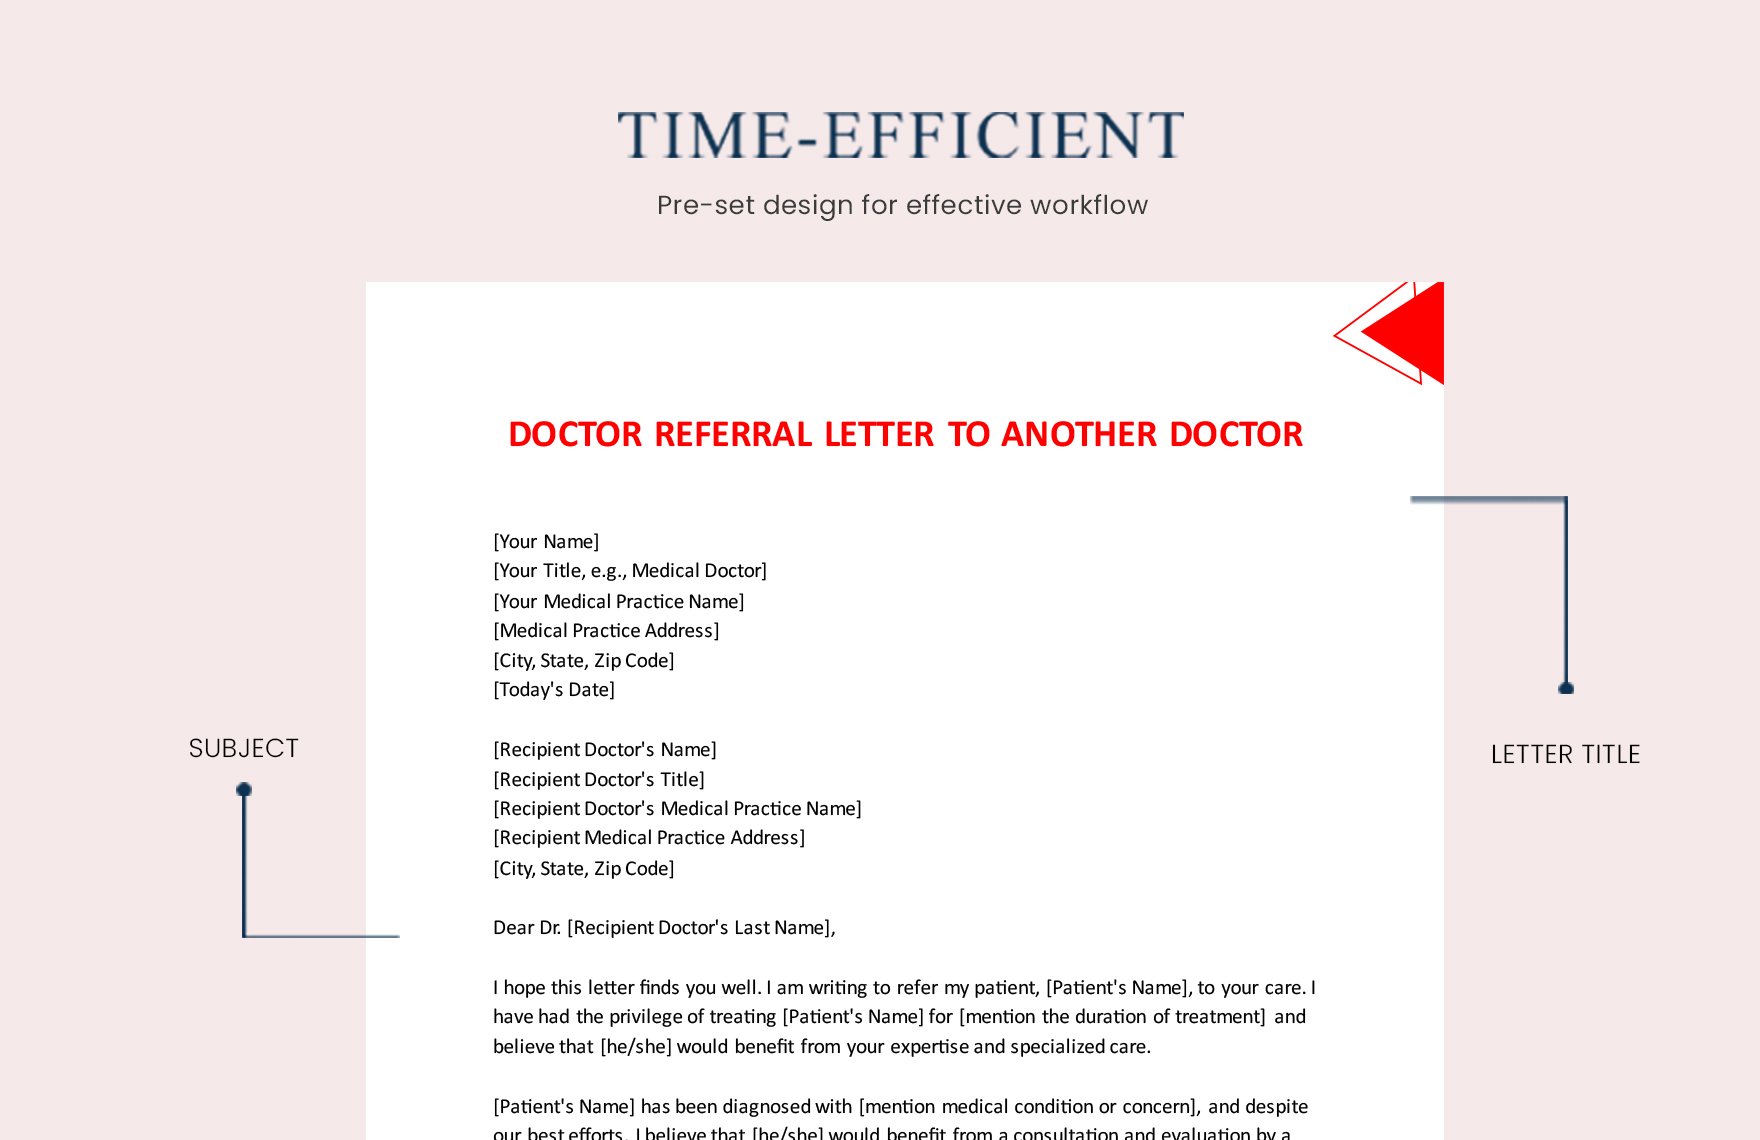 Doctor Referral Letter To Another Doctor